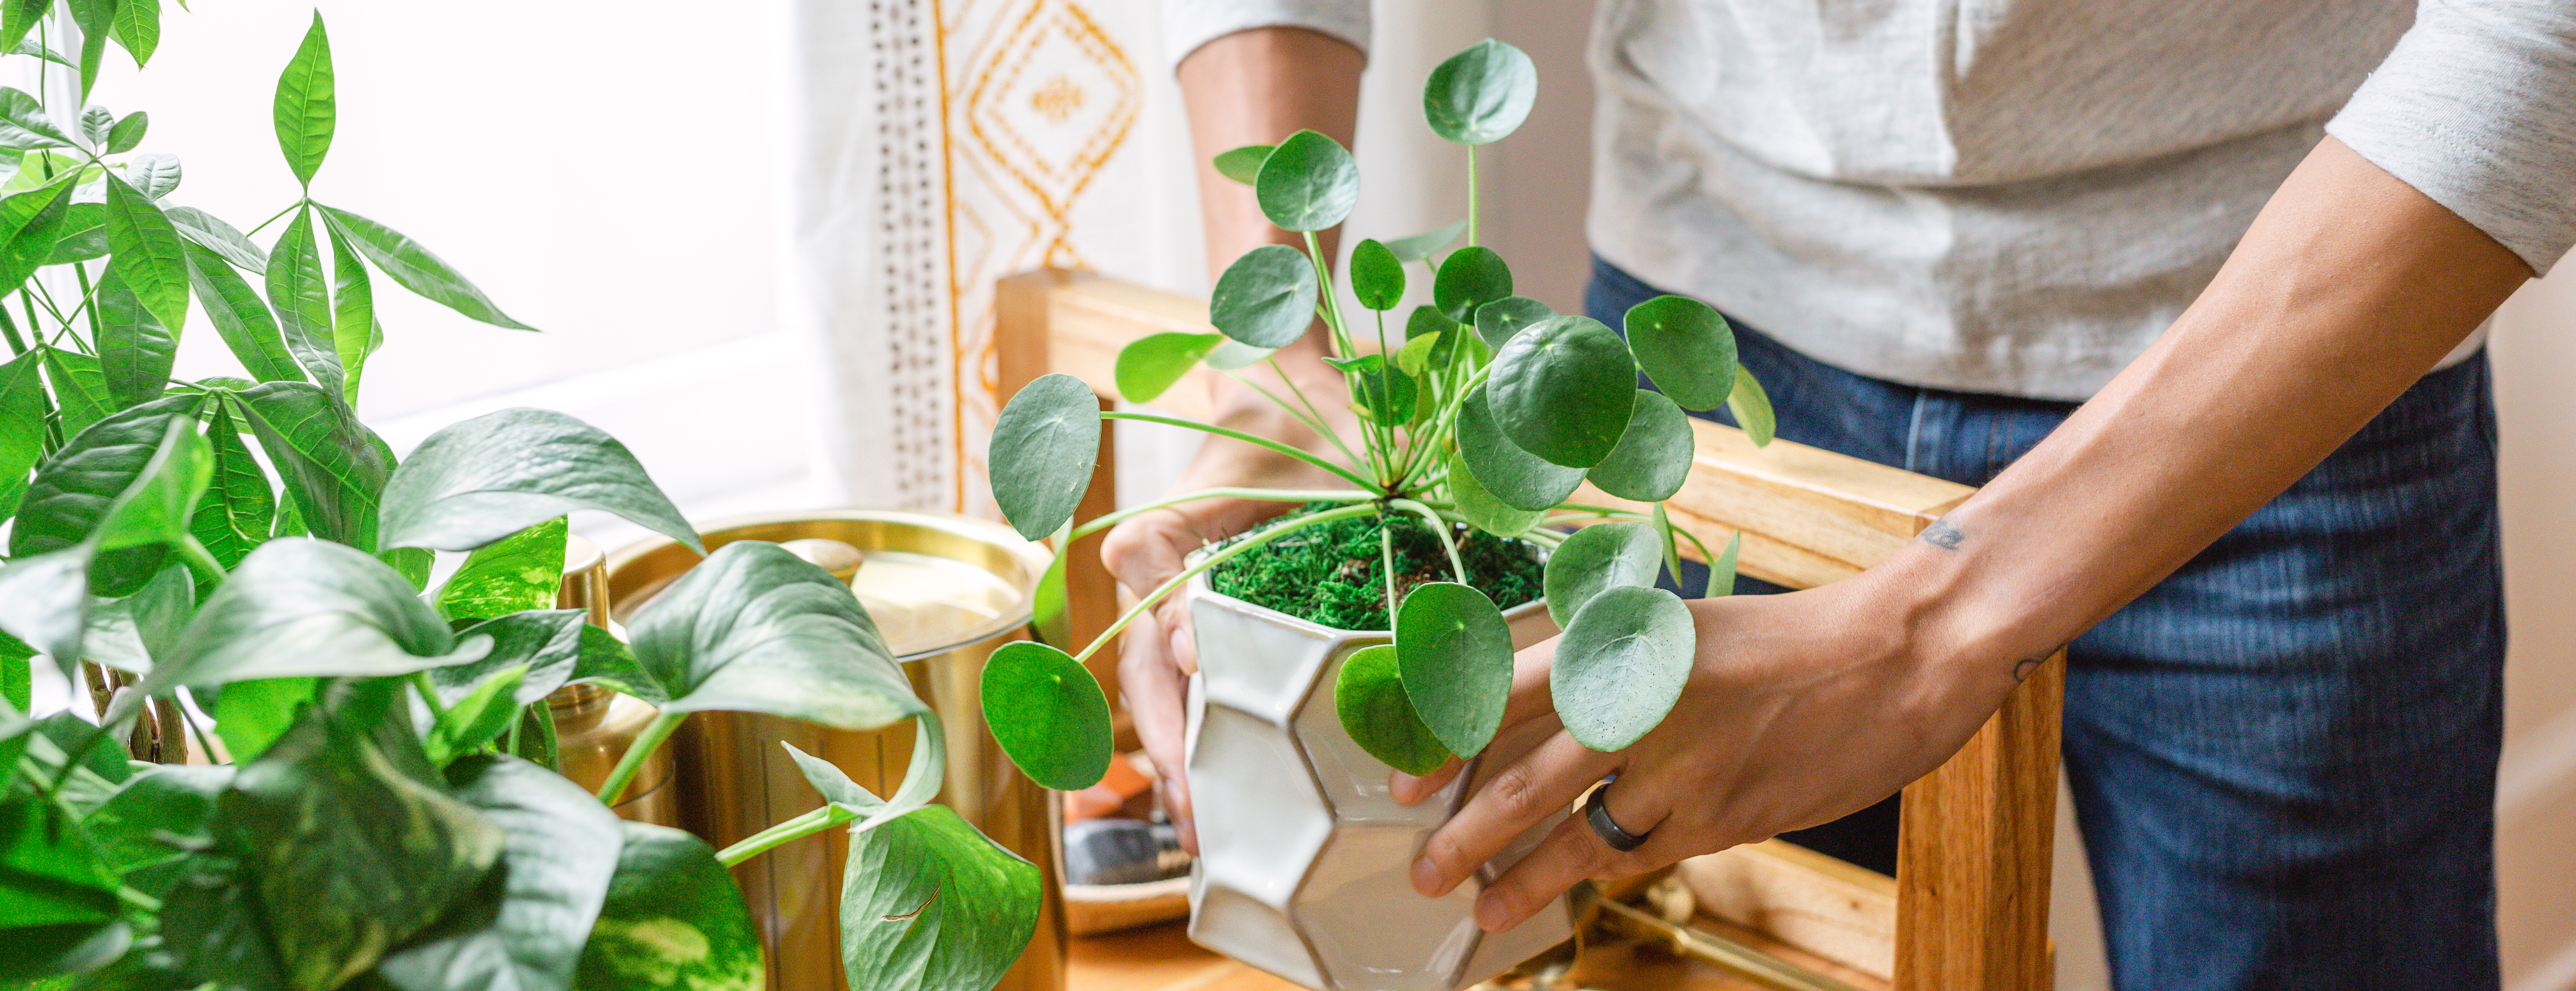 Hands surrounded by indoor plants, Chinese money plant and golden pothos plant